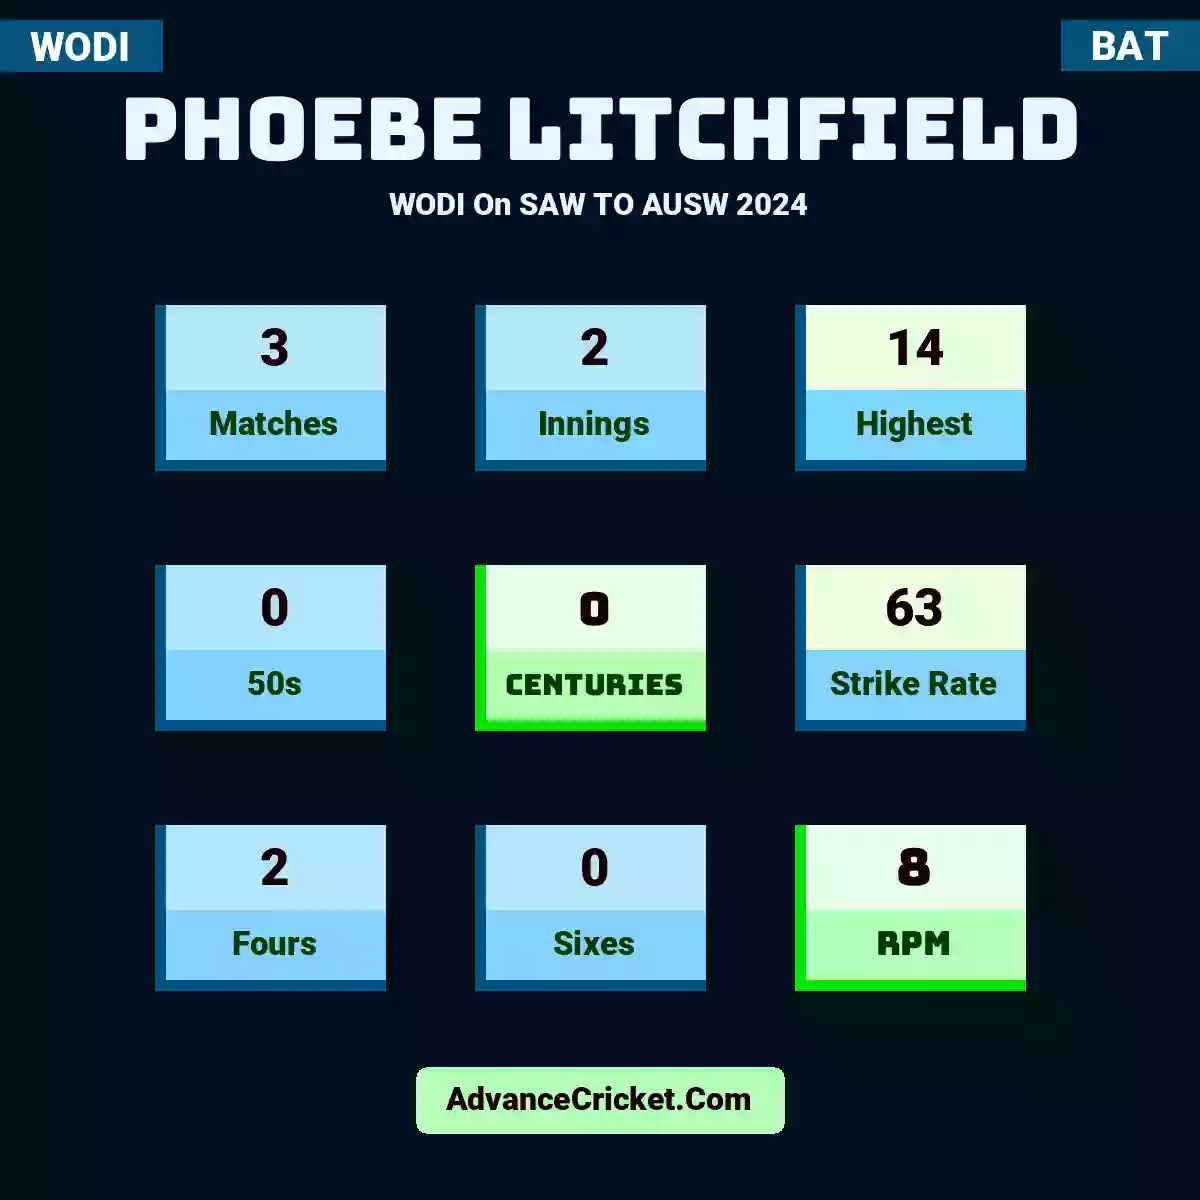 Phoebe Litchfield WODI  On SAW TO AUSW 2024, Phoebe Litchfield played 3 matches, scored 14 runs as highest, 0 half-centuries, and 0 centuries, with a strike rate of 63. P.Litchfield hit 2 fours and 0 sixes, with an RPM of 8.